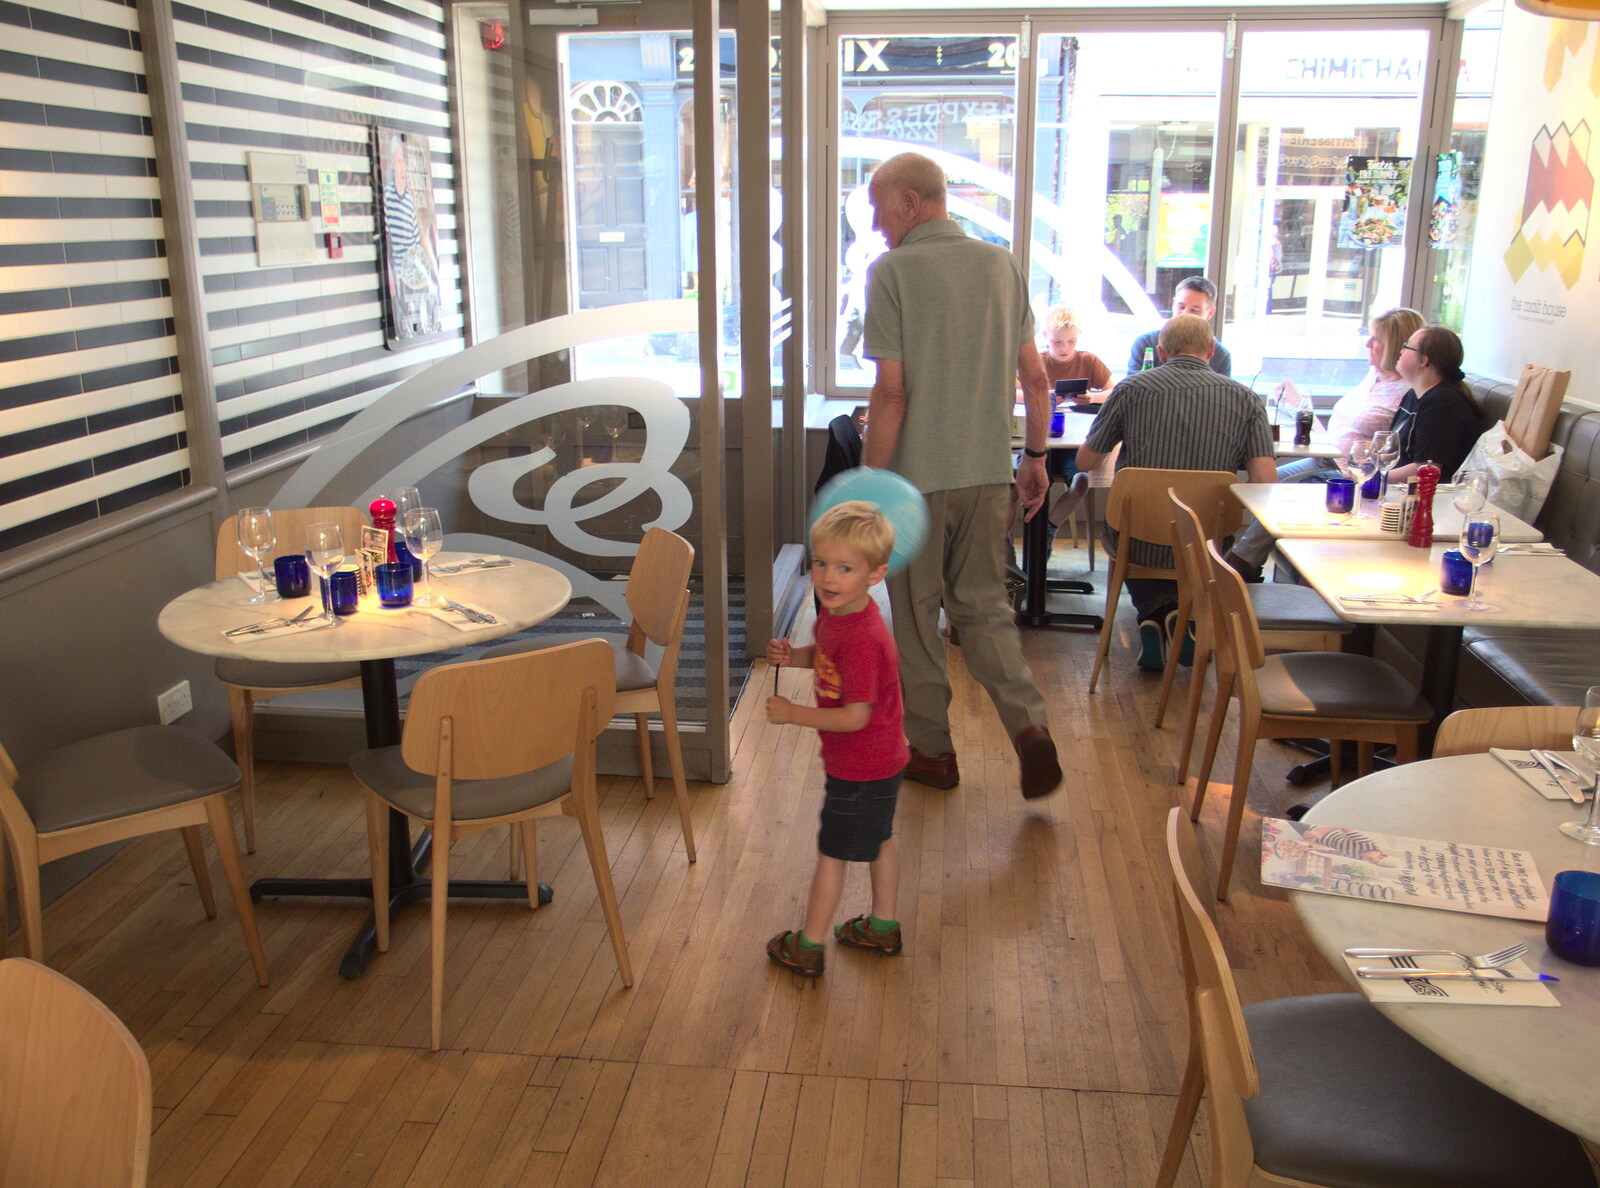 Harry and Grandad leave Pizza Express from The BBs at Bacton, and Abbey Gardens, Bury St. Edmunds, Suffolk - 19th July 2015